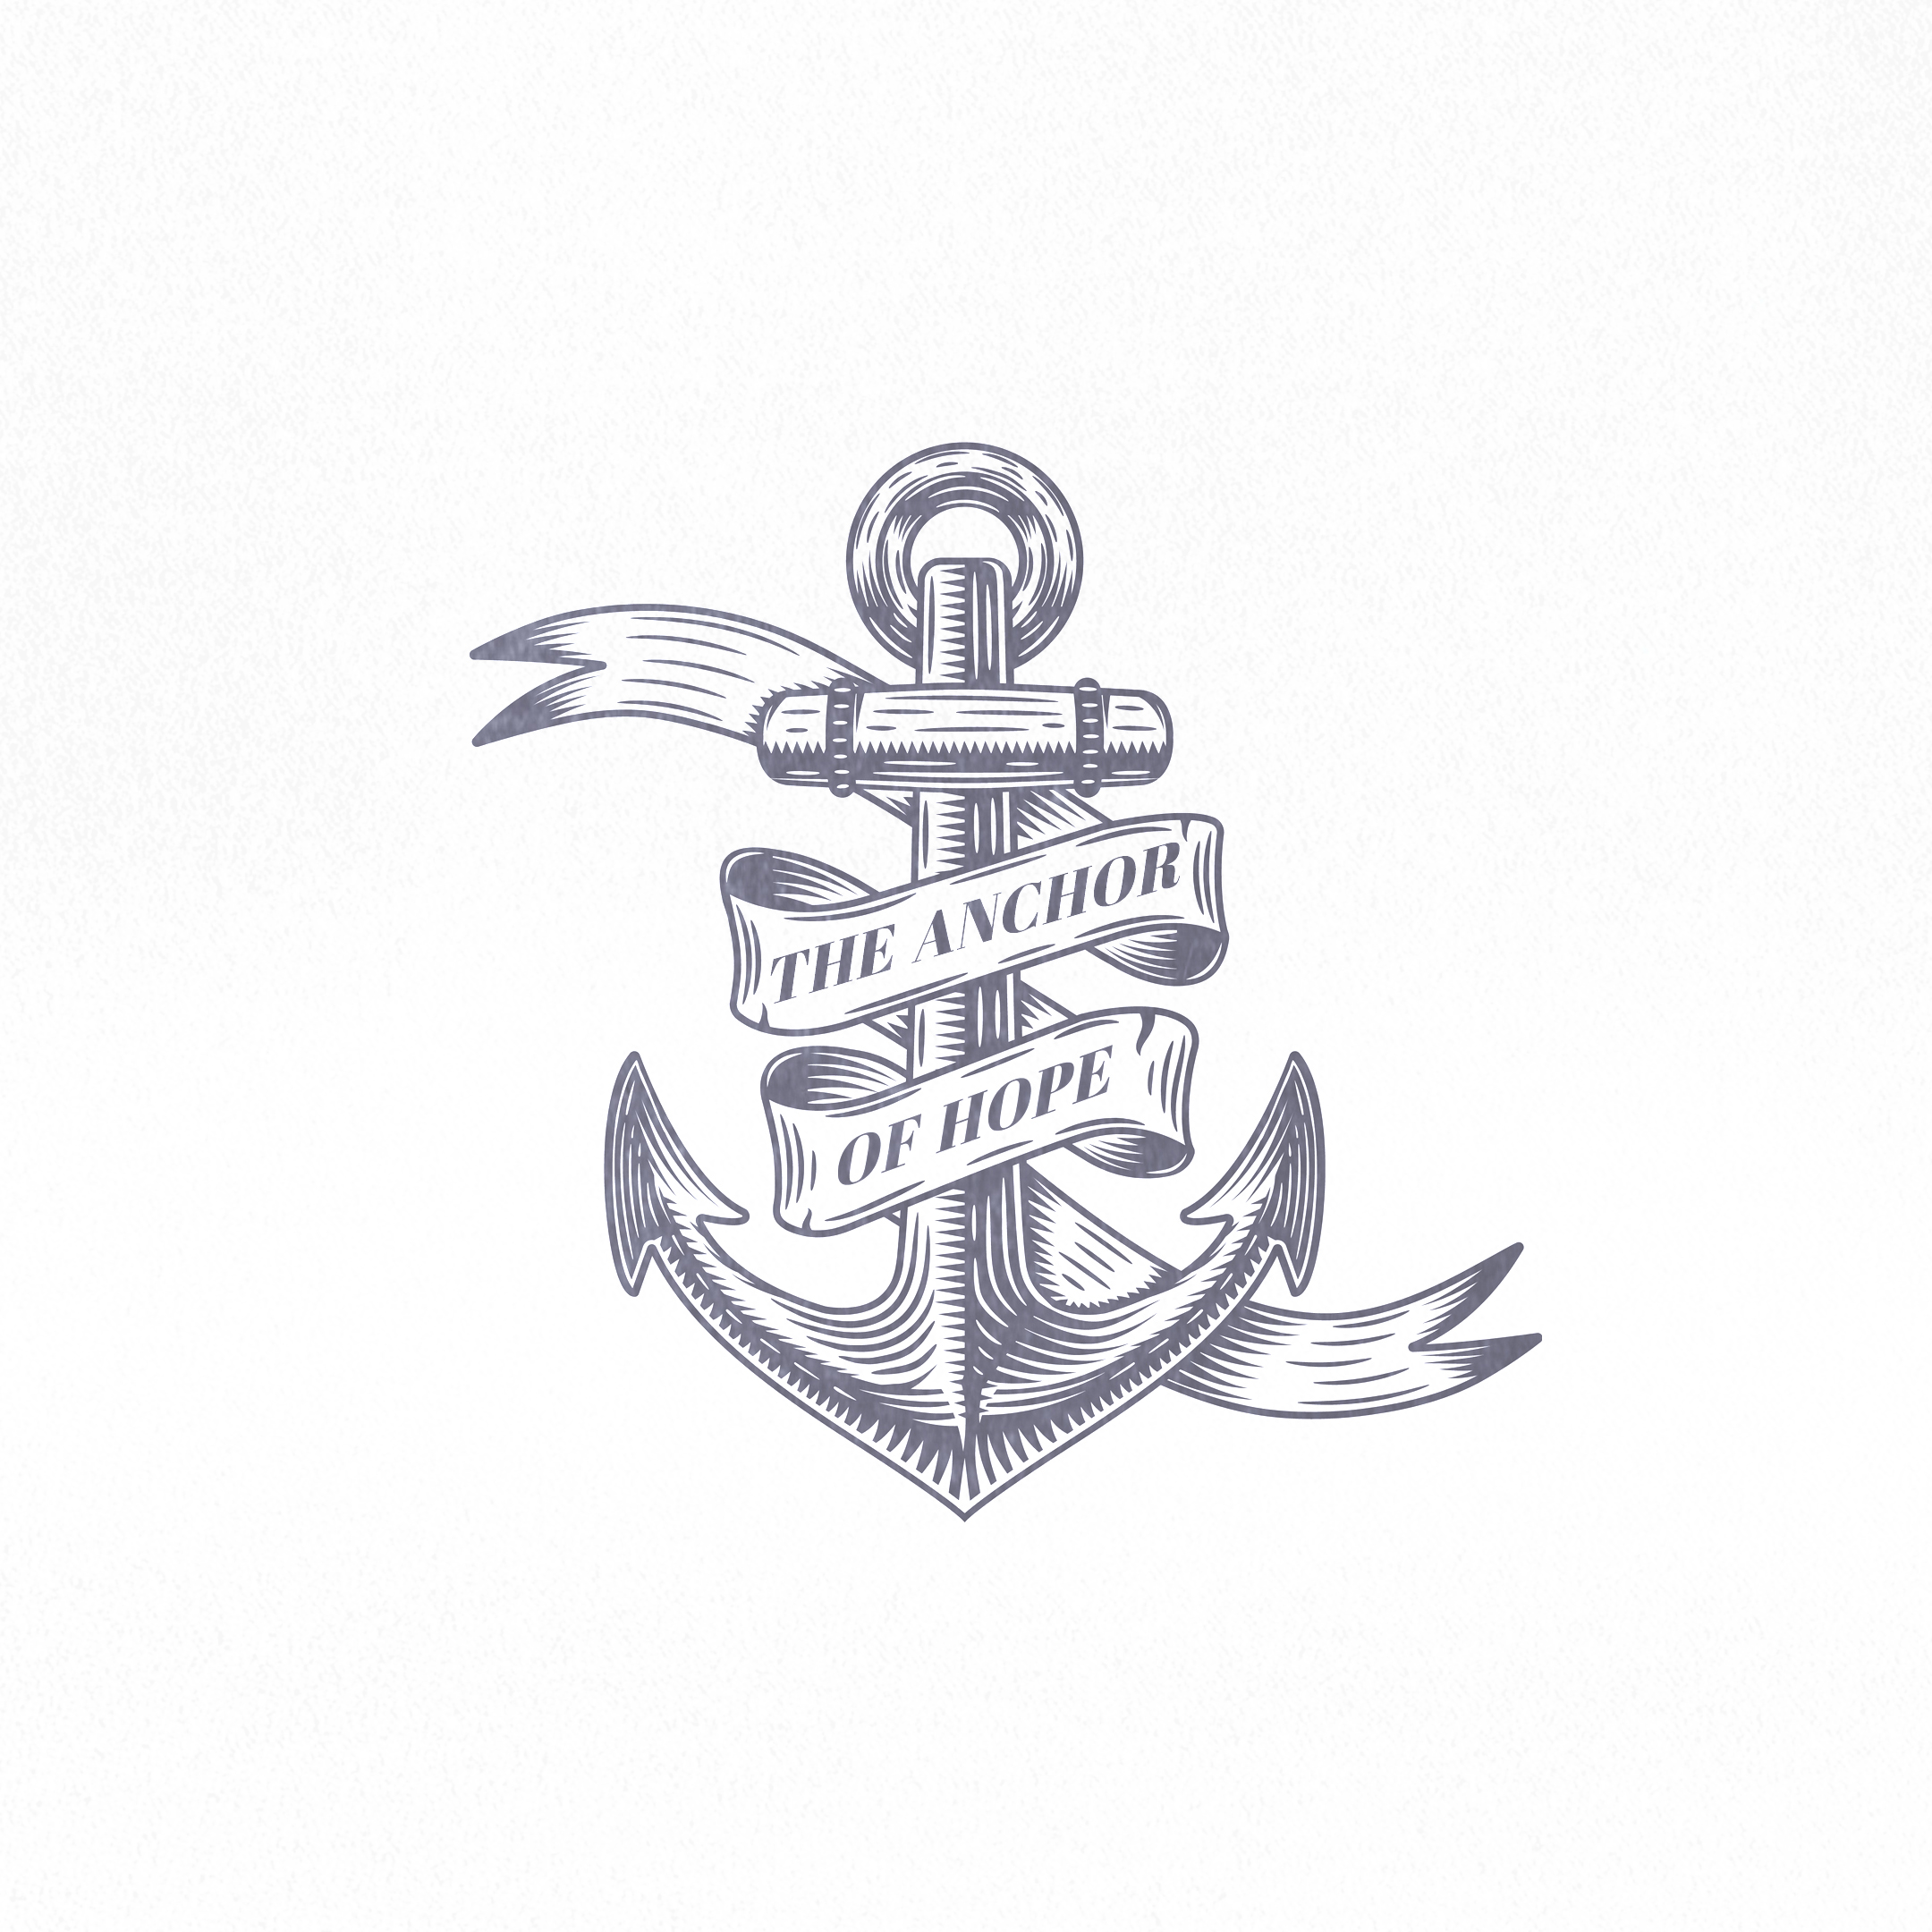 The Anchor Of Hope